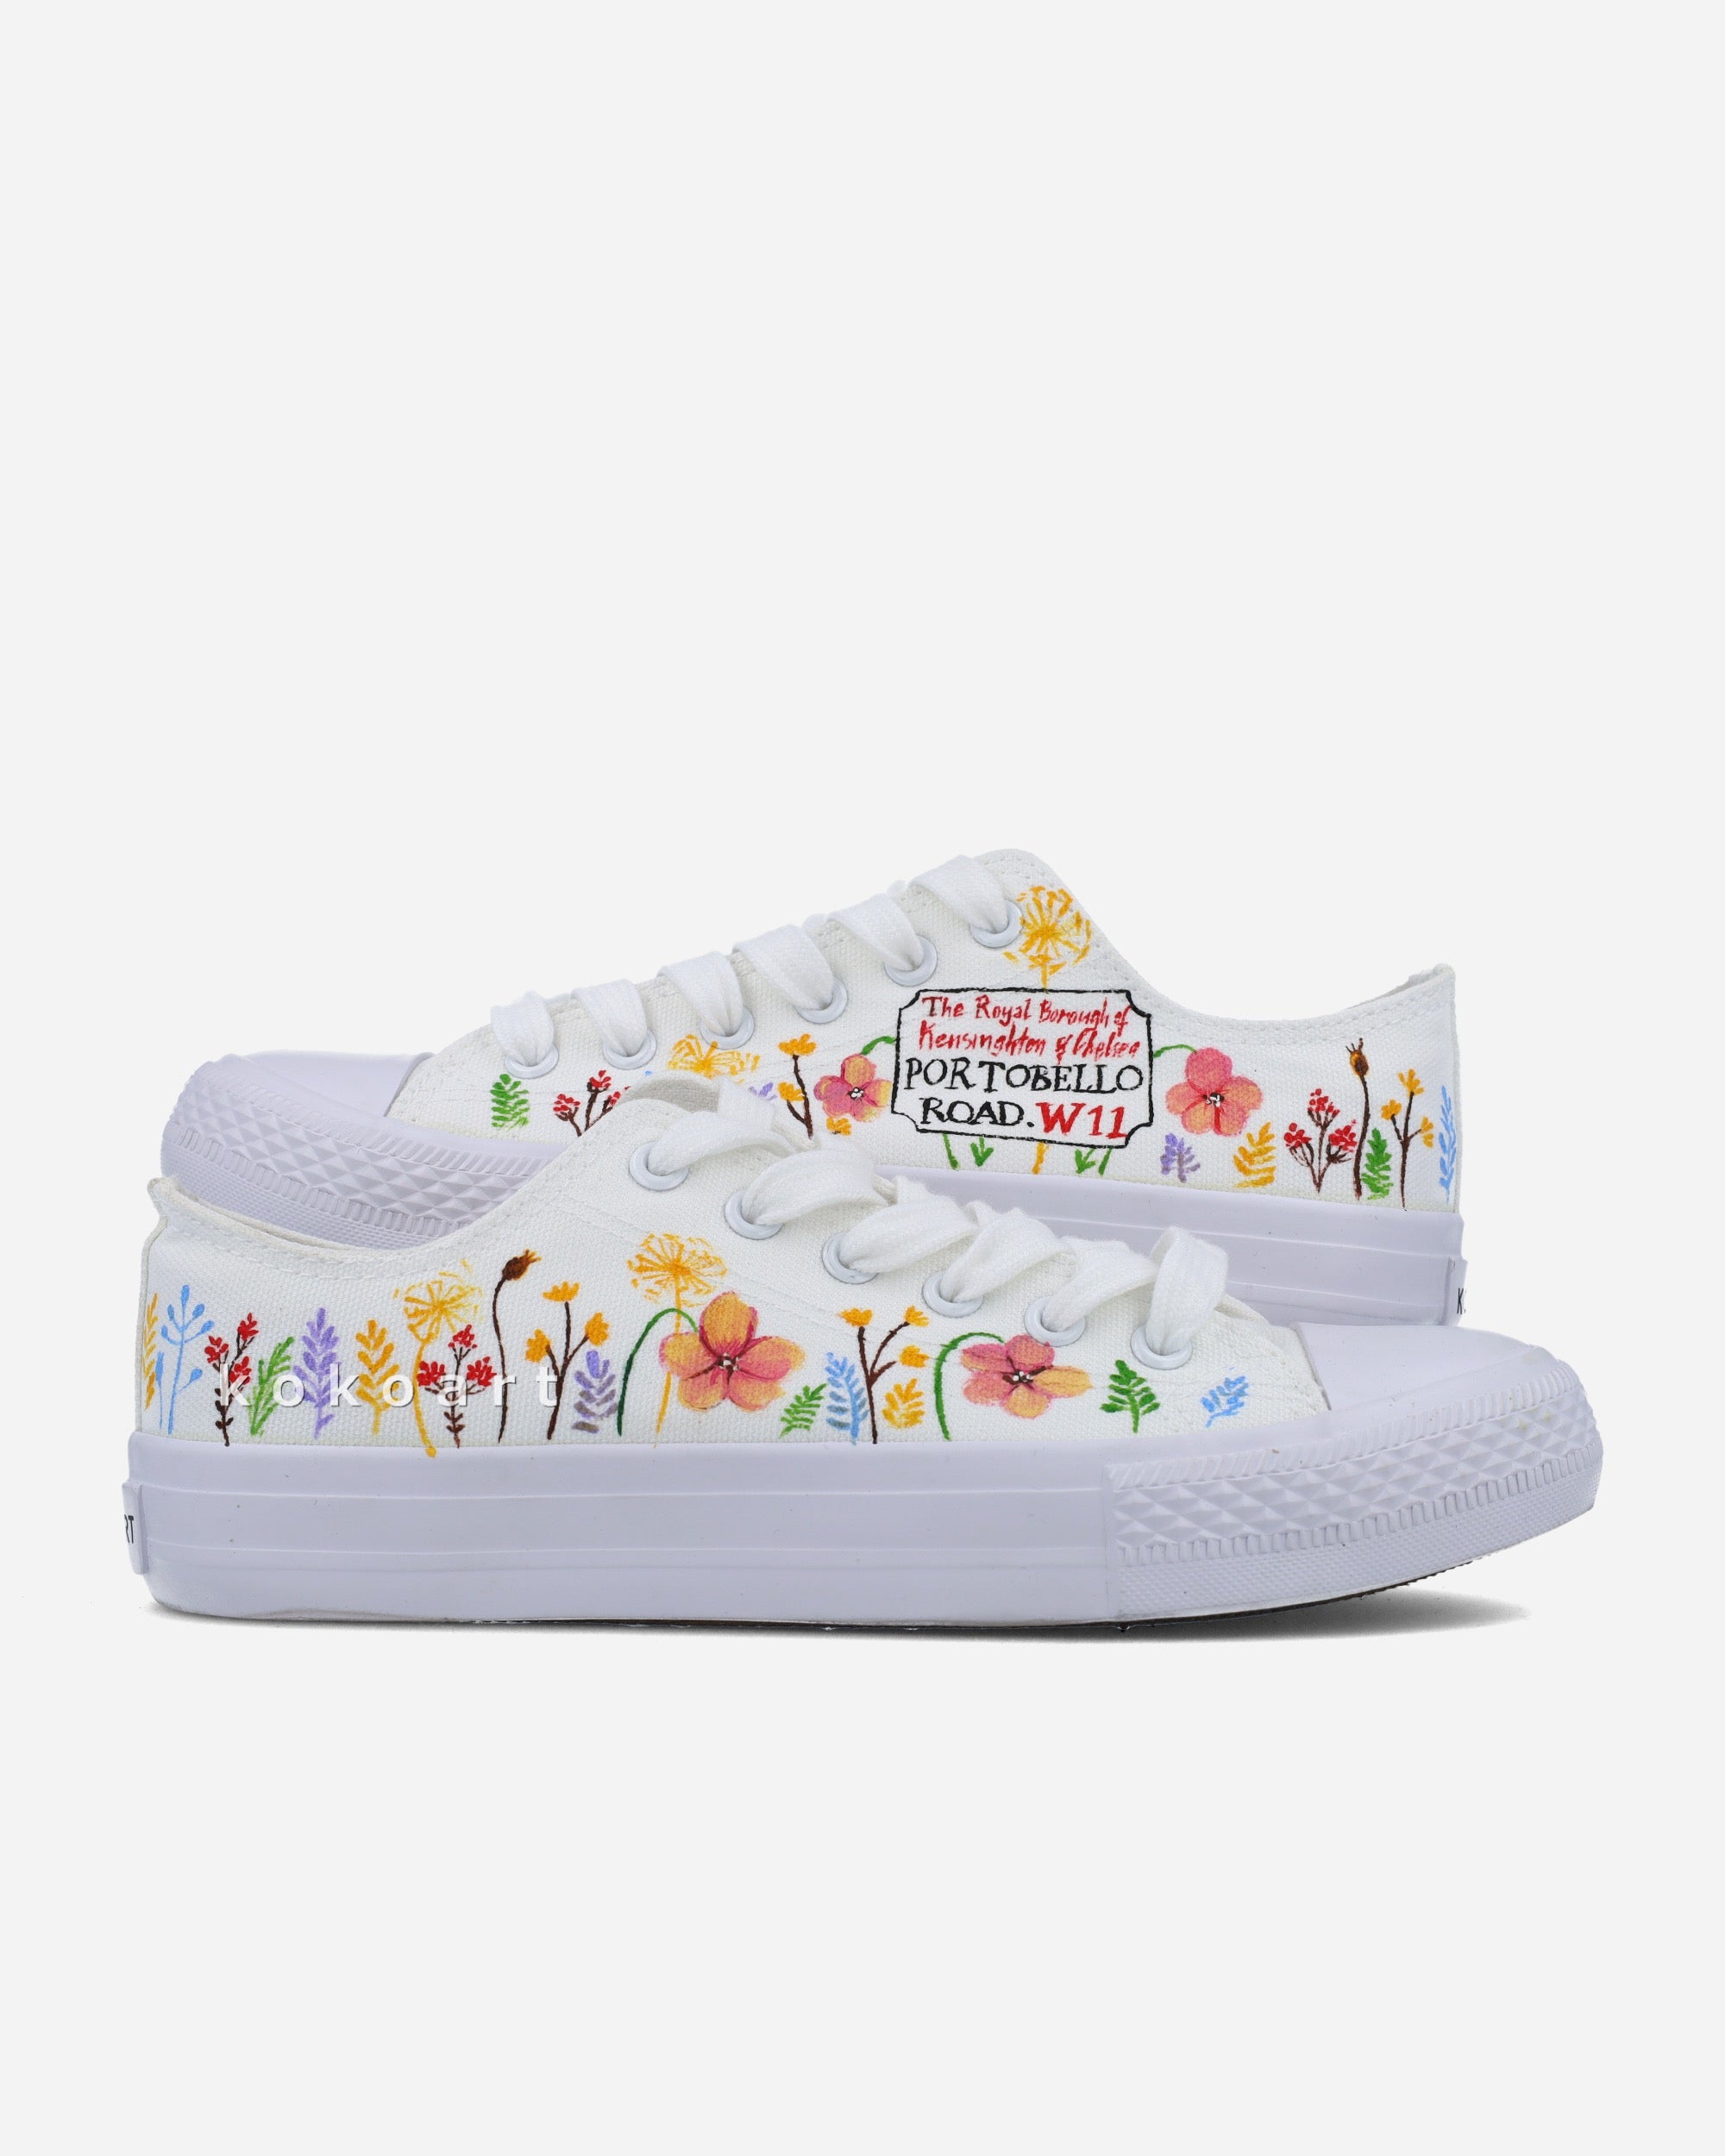 Floral Portobello Sign Hand Painted Shoes